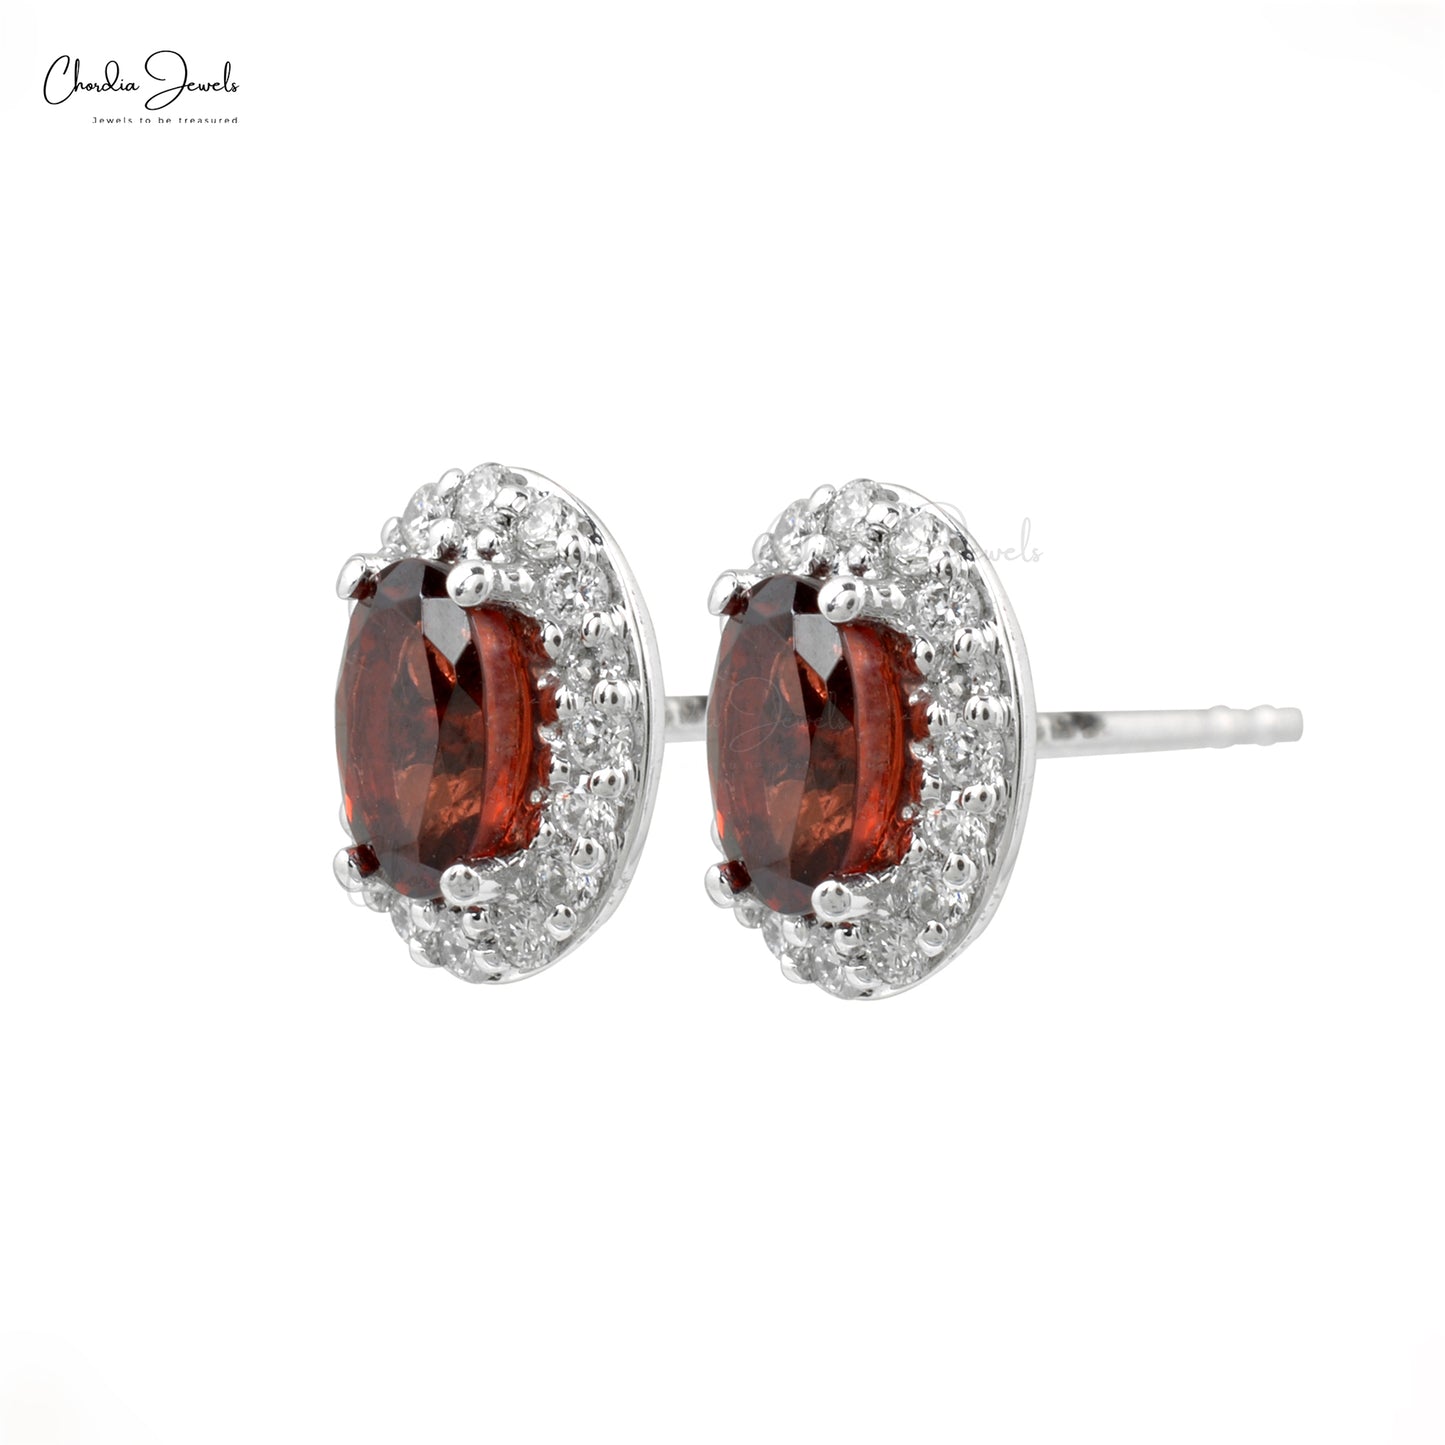 Classic Design Genuine Red Garnet Oval Shape Halo Stud Earrings Studded With White Diamonds Real 14k White Gold Jewelry Gift For Wife